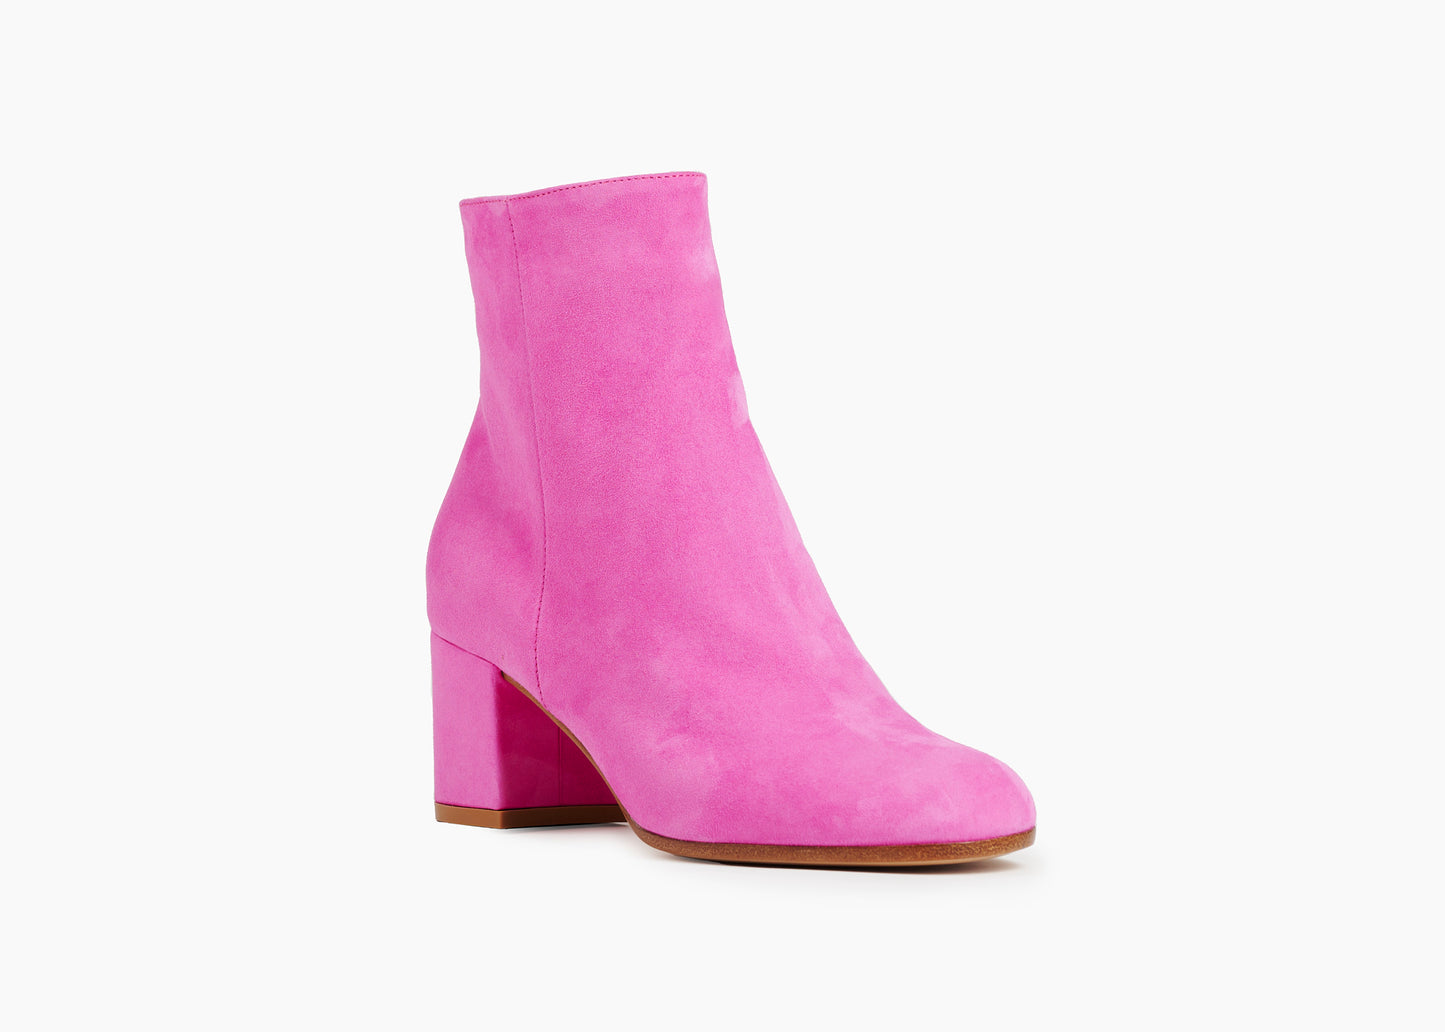 SALE Margaux Ankle Boot Suede Fuchsia was $1795